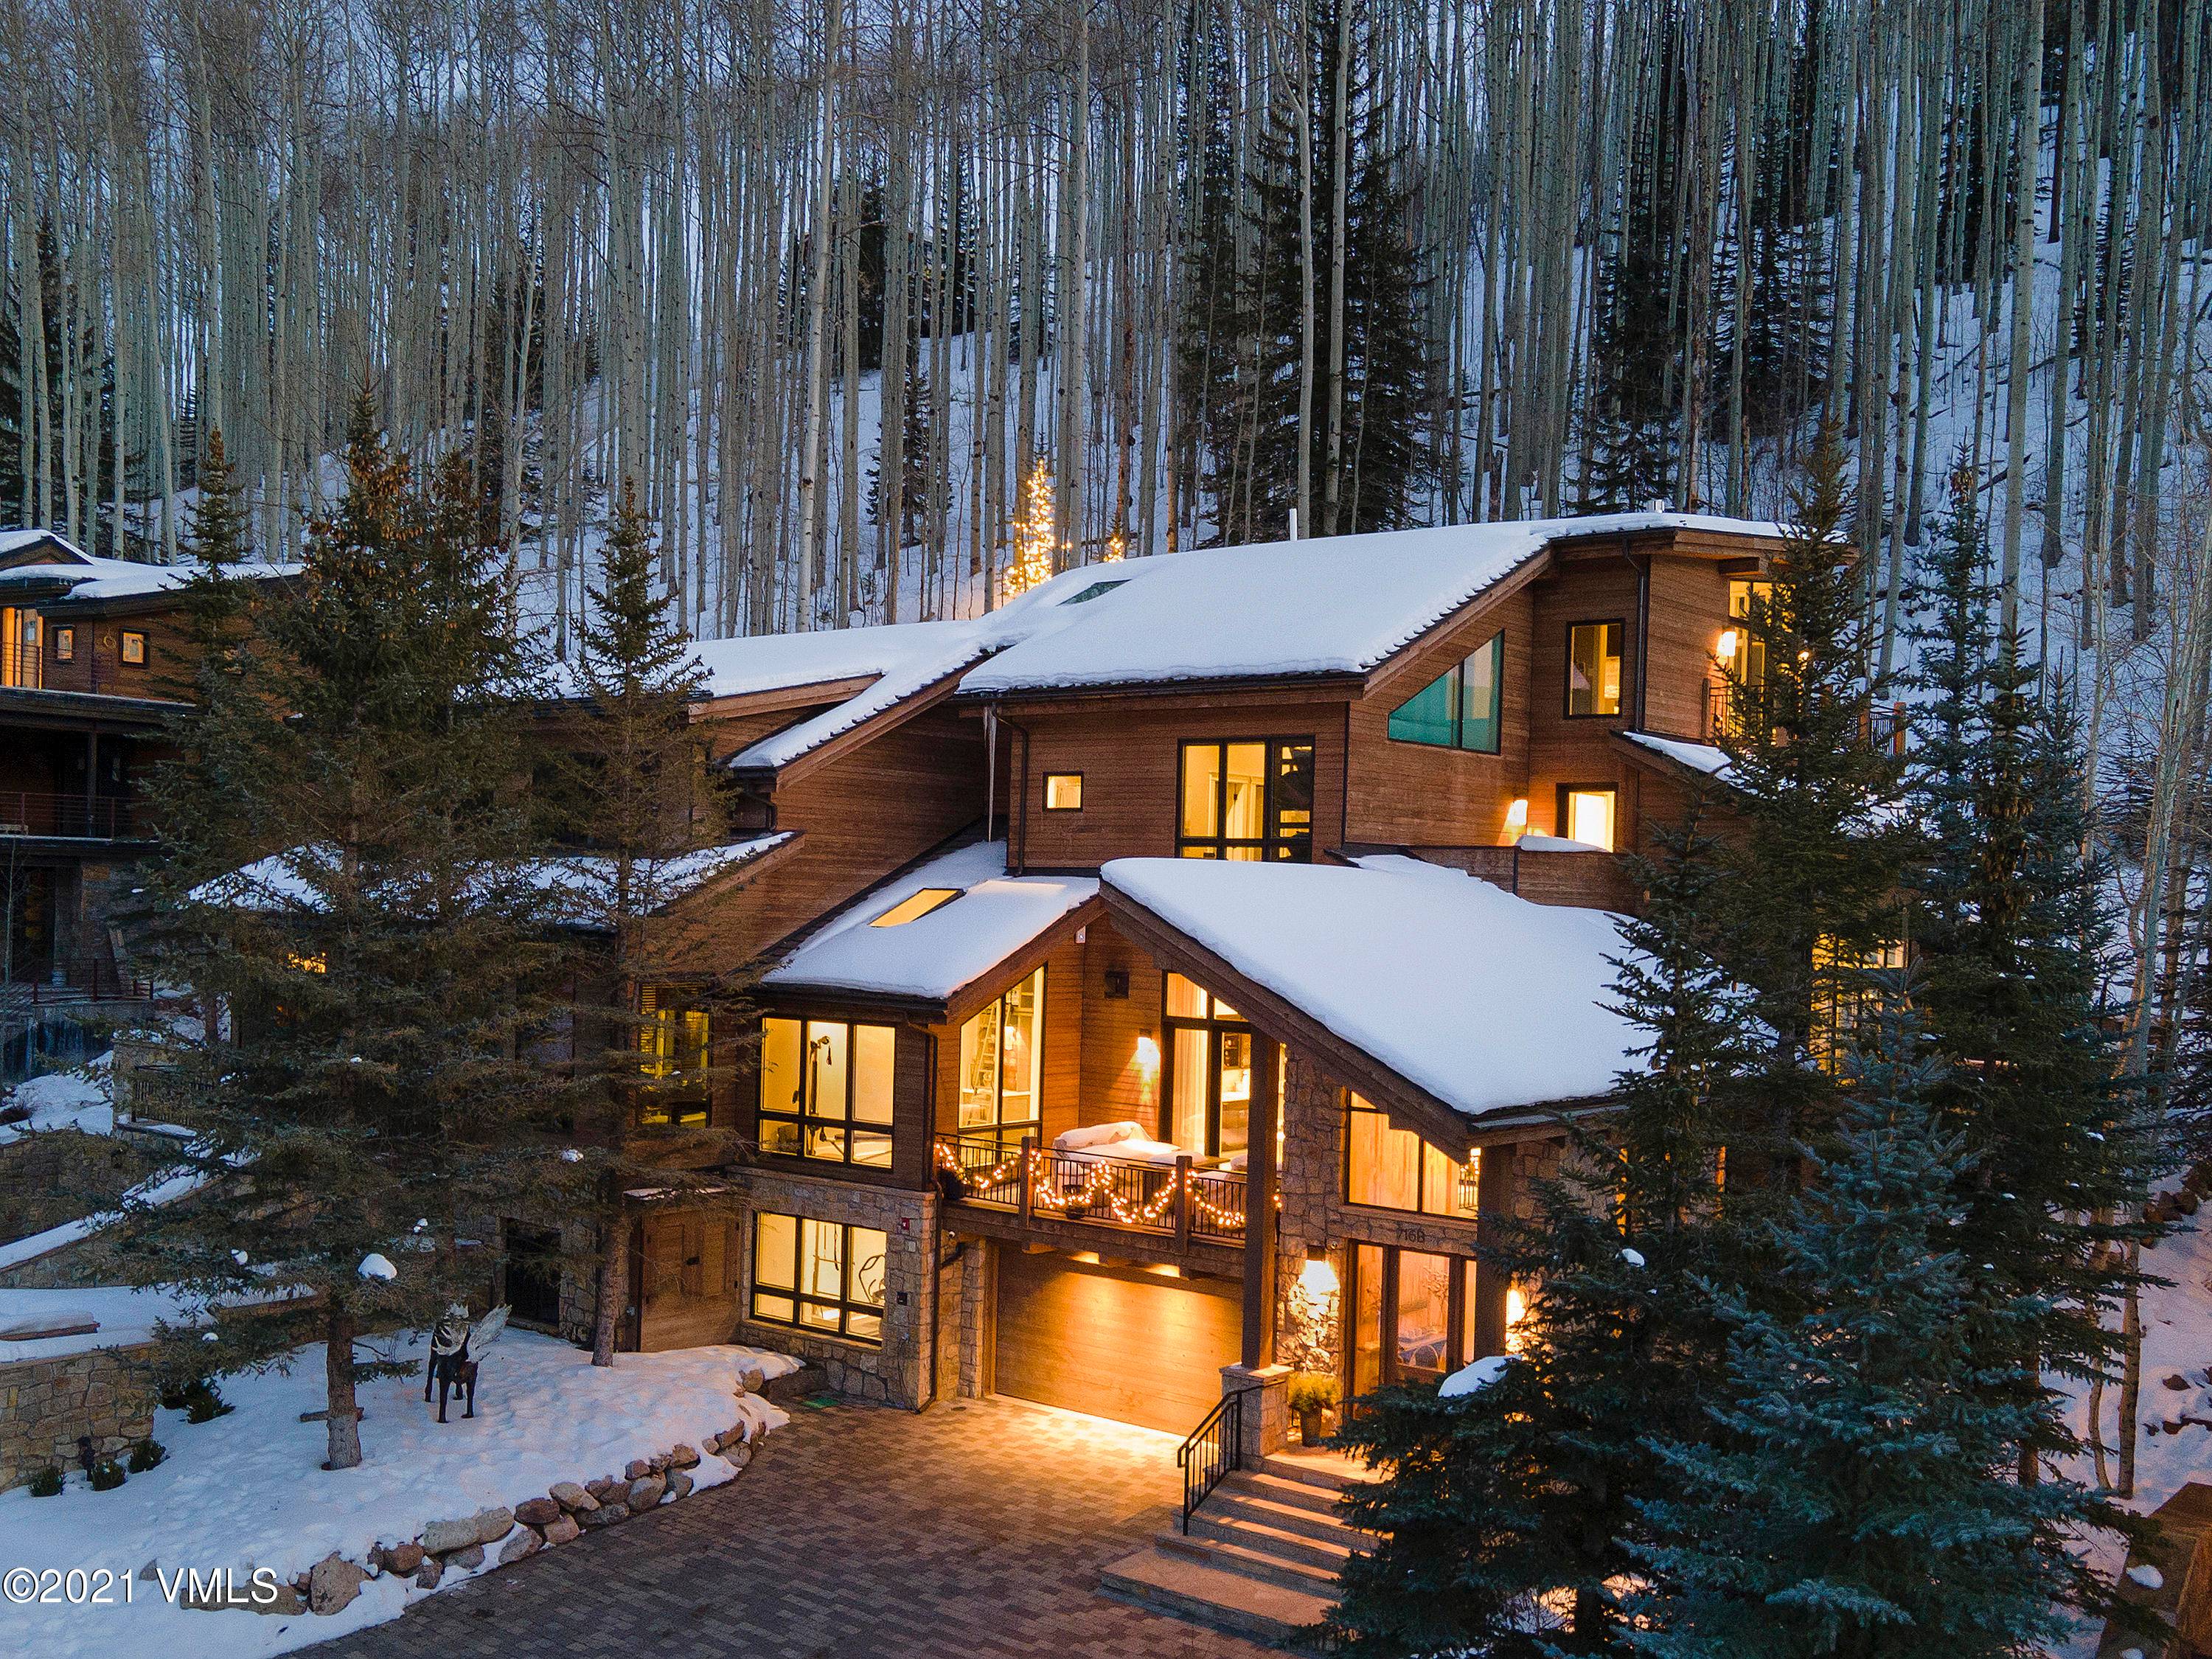 The ultimate in new Vail construction, stately 716 Forest Road exudes elegance with top of the line modern finishes and features at one of Vail's most prestigious addresses.